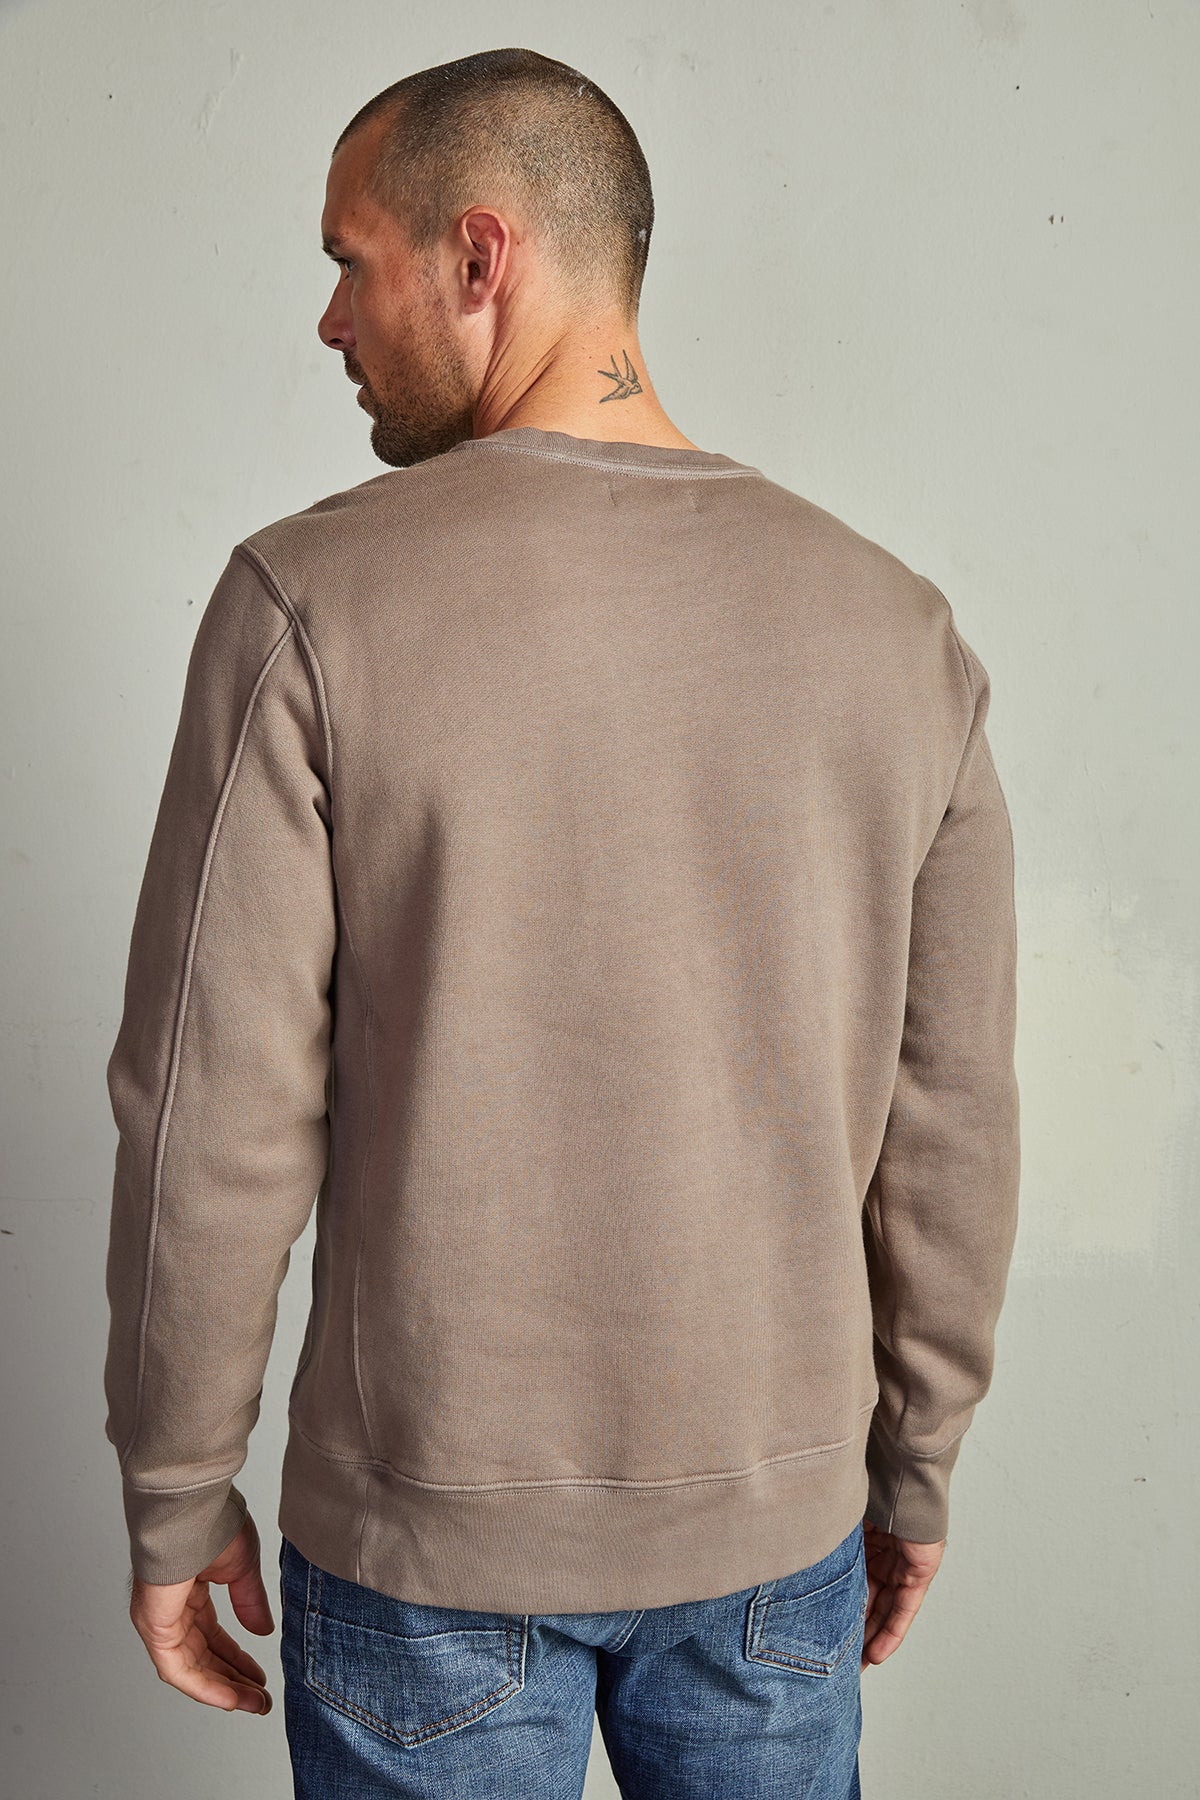 The back view of a man wearing a Velvet by Graham & Spencer KING CREW NECK SWEATSHIRT with clean lines.-14889960571073